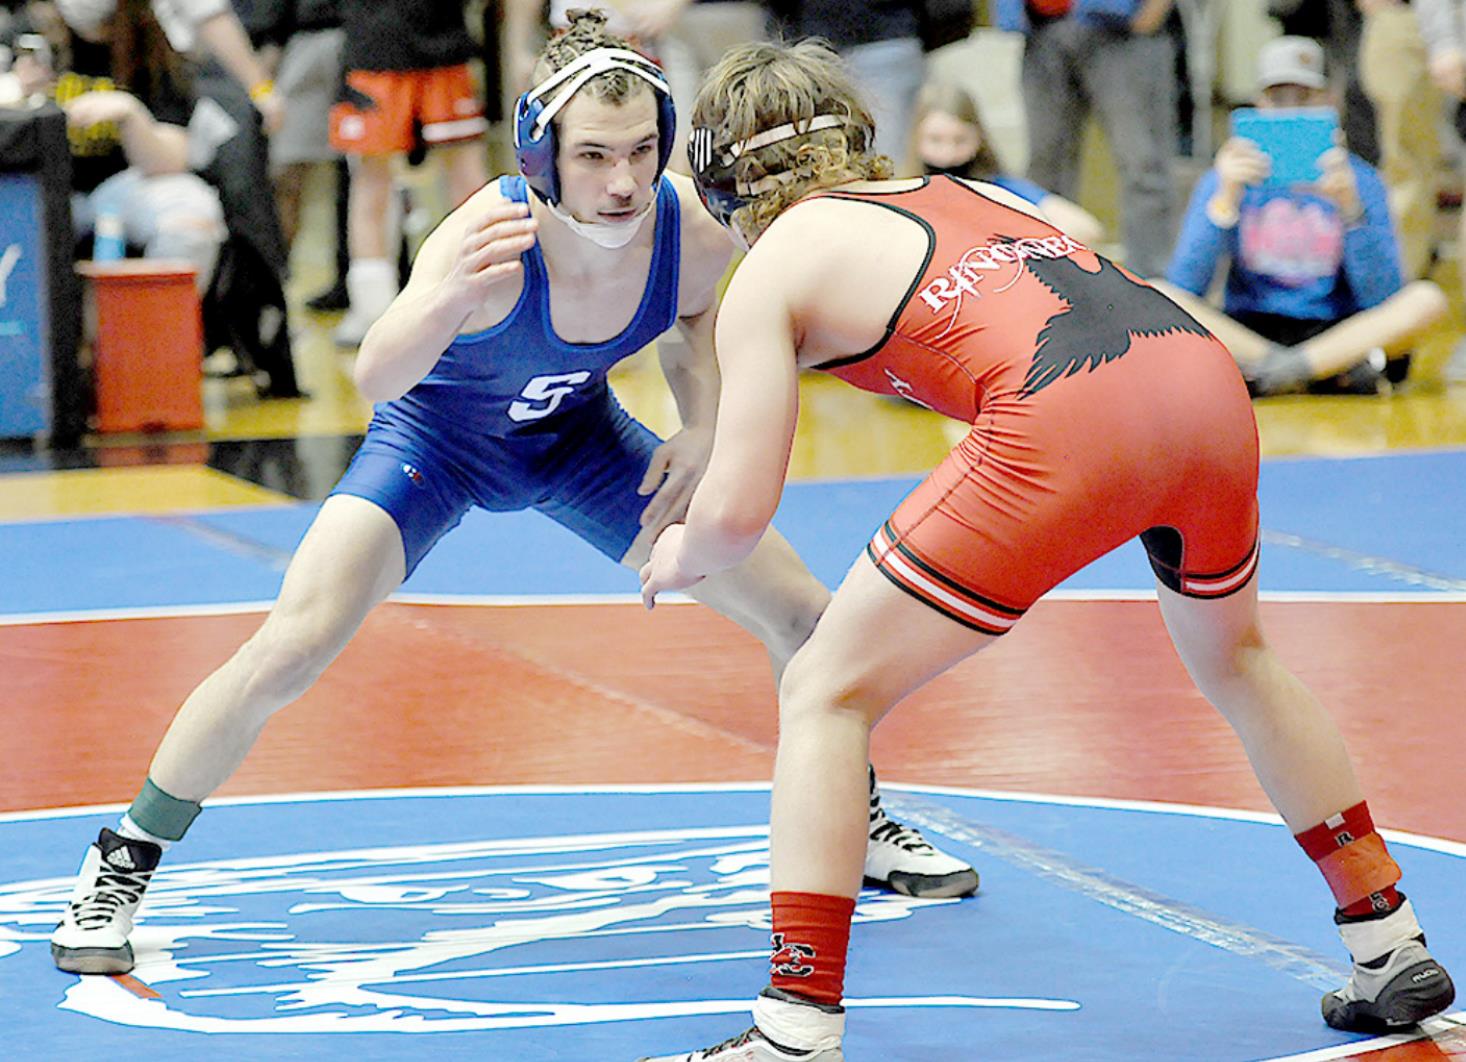 LOOKING TO GET A TAKEDOWN—Leighton Colburn looks for a takedown in the first round of the consolation matches at state wrestling against Hill City’s Aidan Hockman.